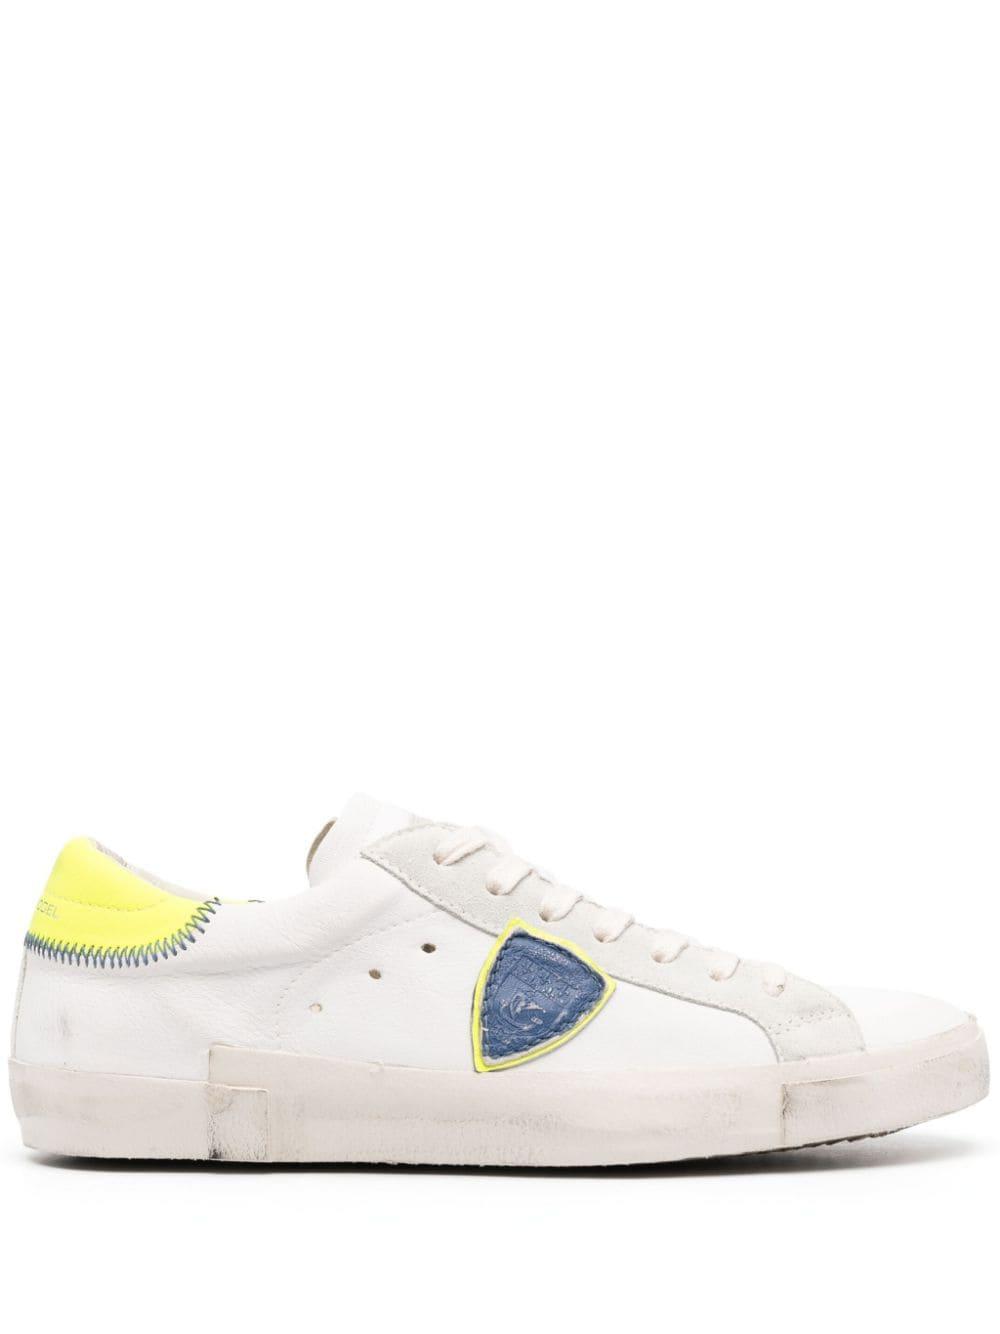 Philippe Model Paris Prsx Suede Low-top Sneakers in White for Men ...